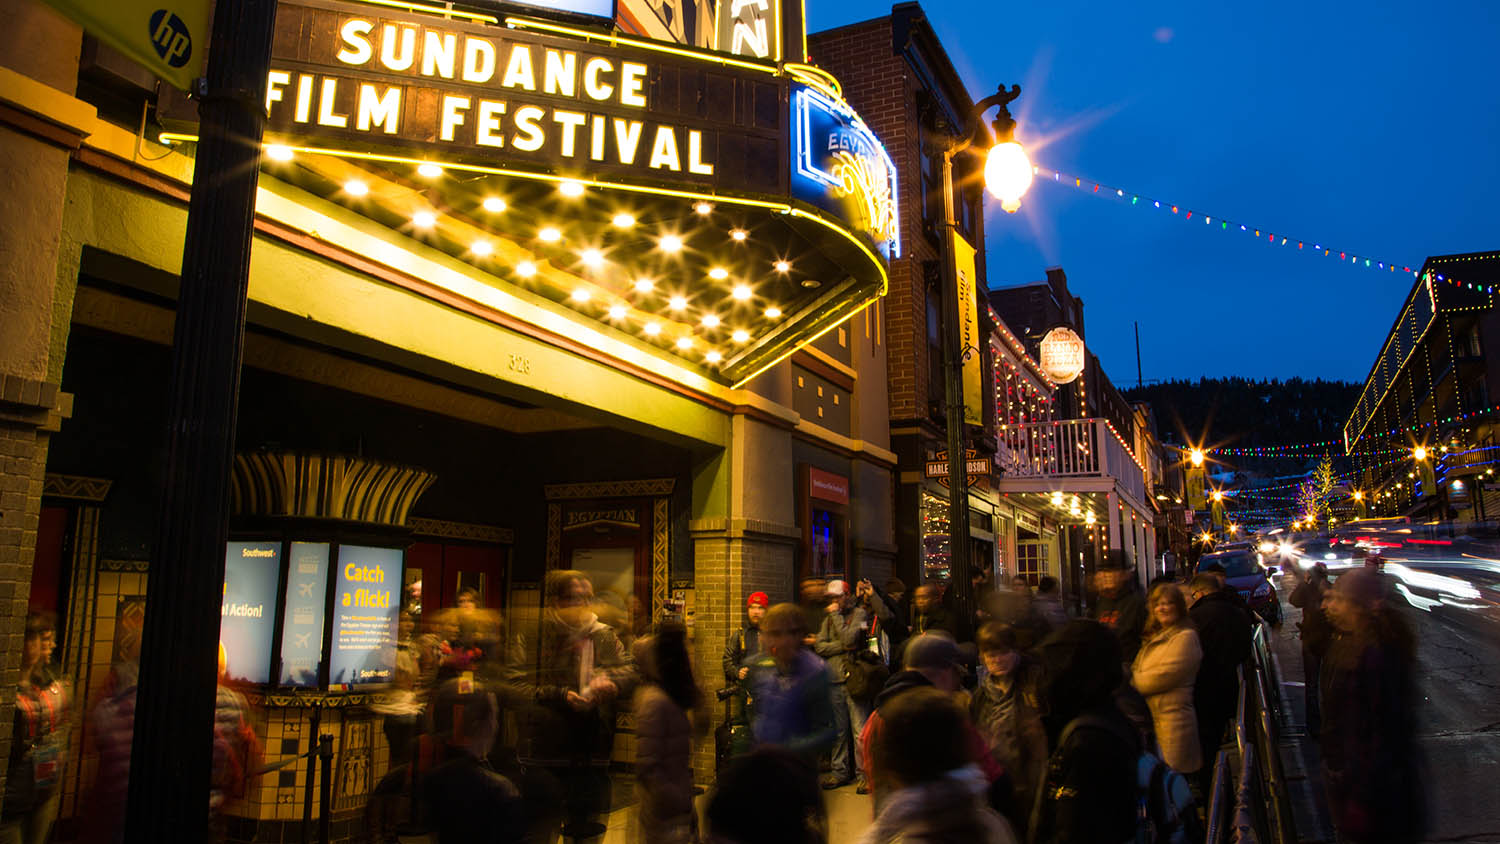 A busy Park City theater at night, with "Sundance Film Festival" illuminated on the sign, and lots of excited people in coats waiting under glowing lights